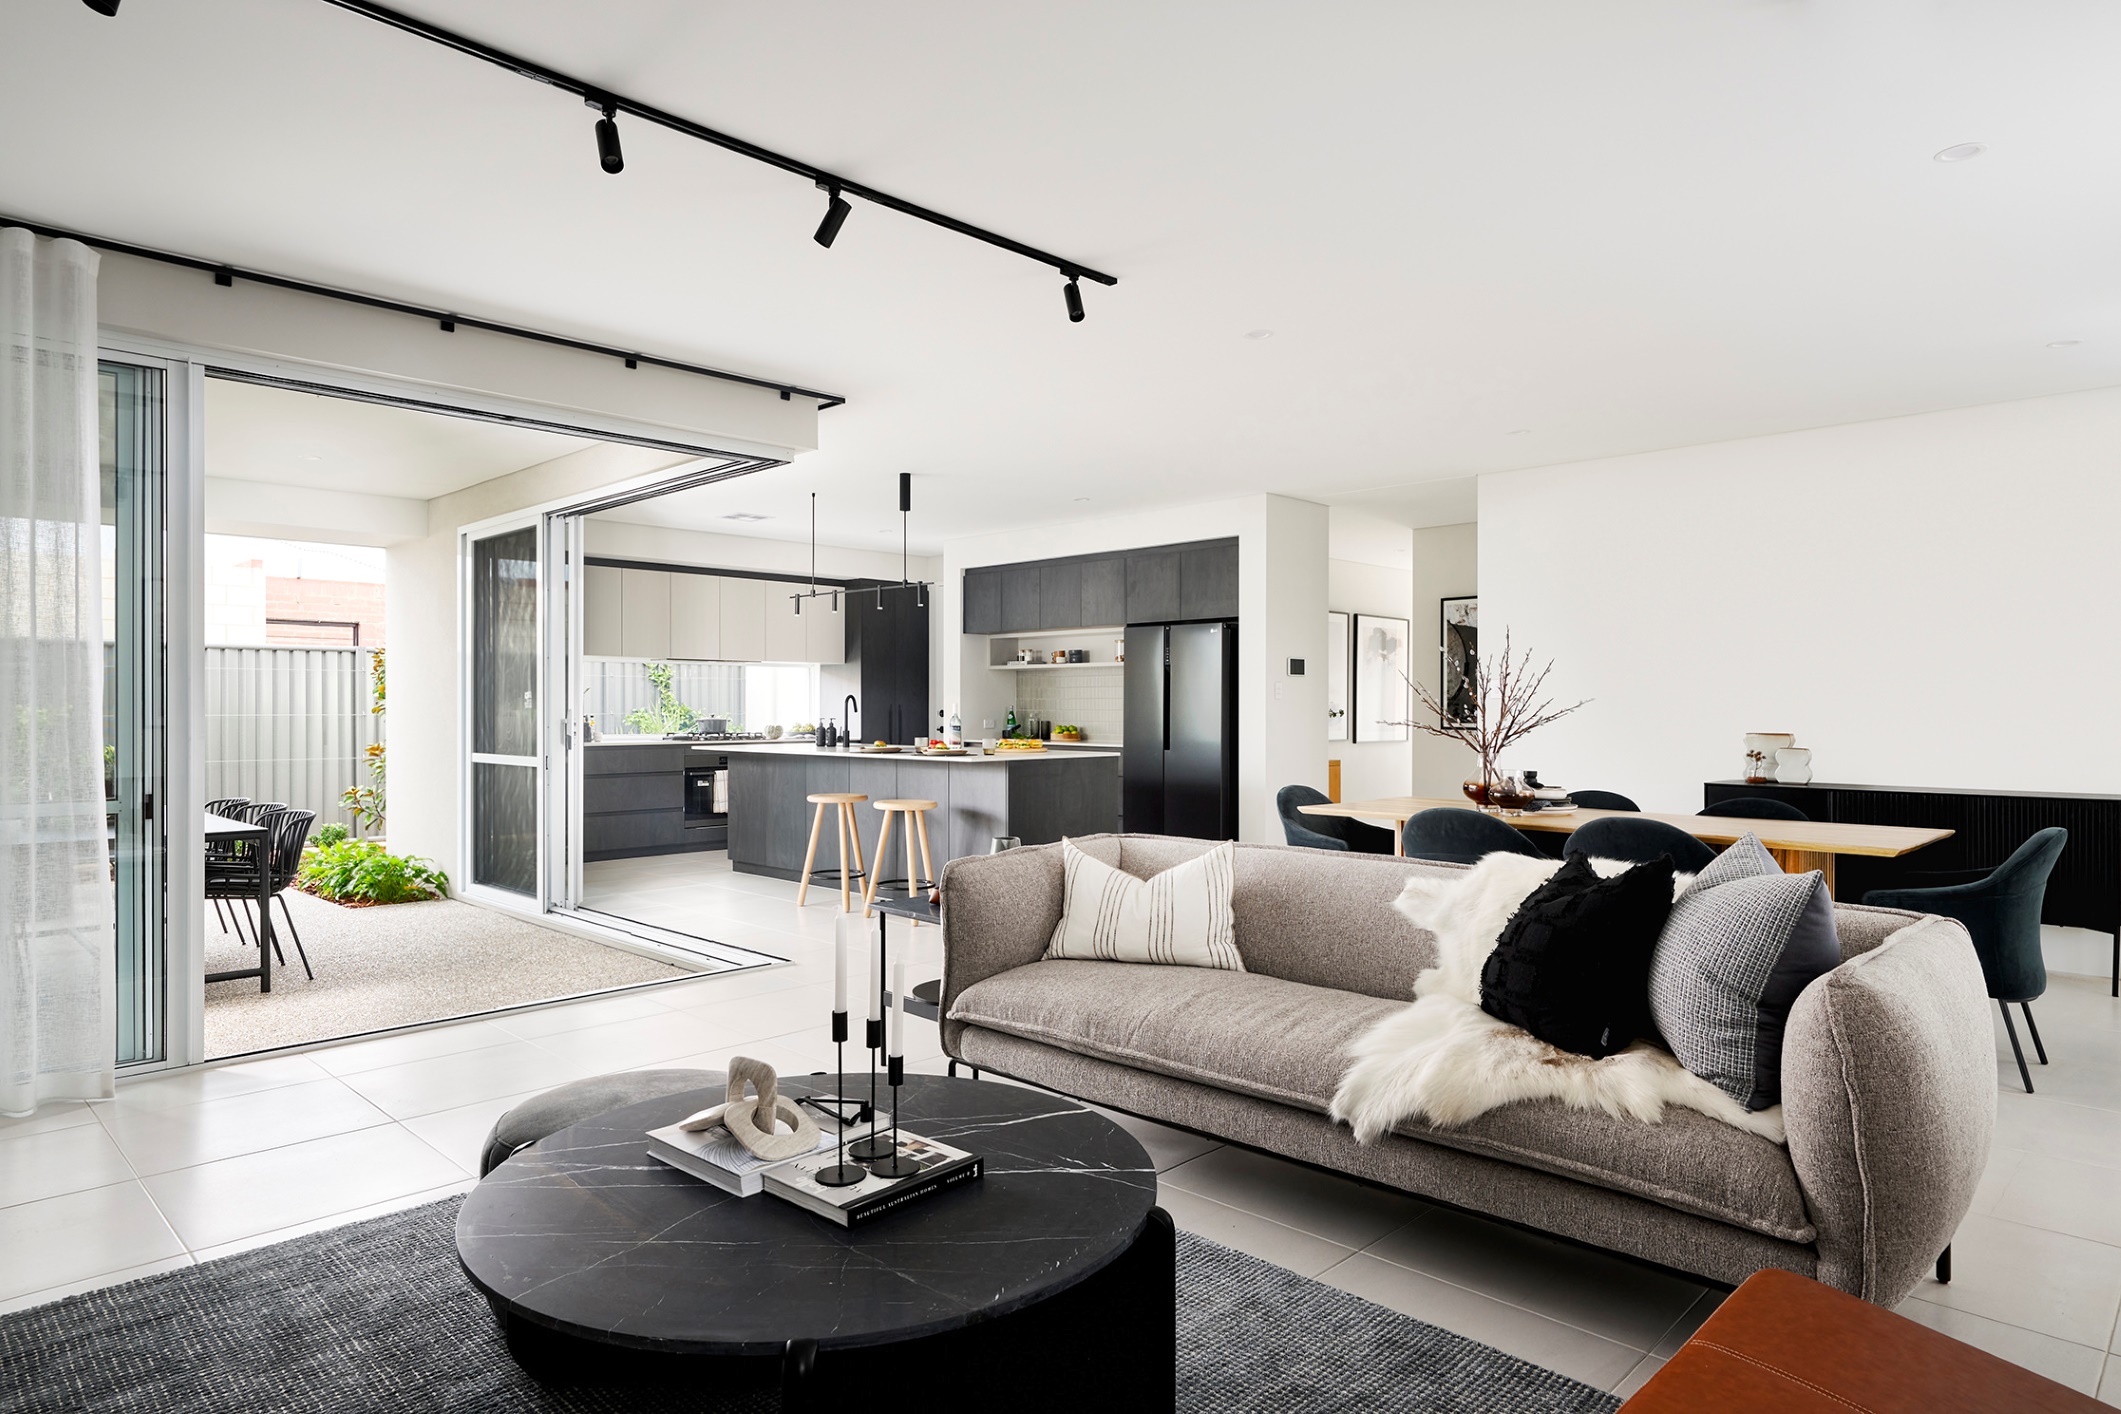 Catalina, Mindarie and Clarkson, Catalina Dale Alcock Oslo family, living space